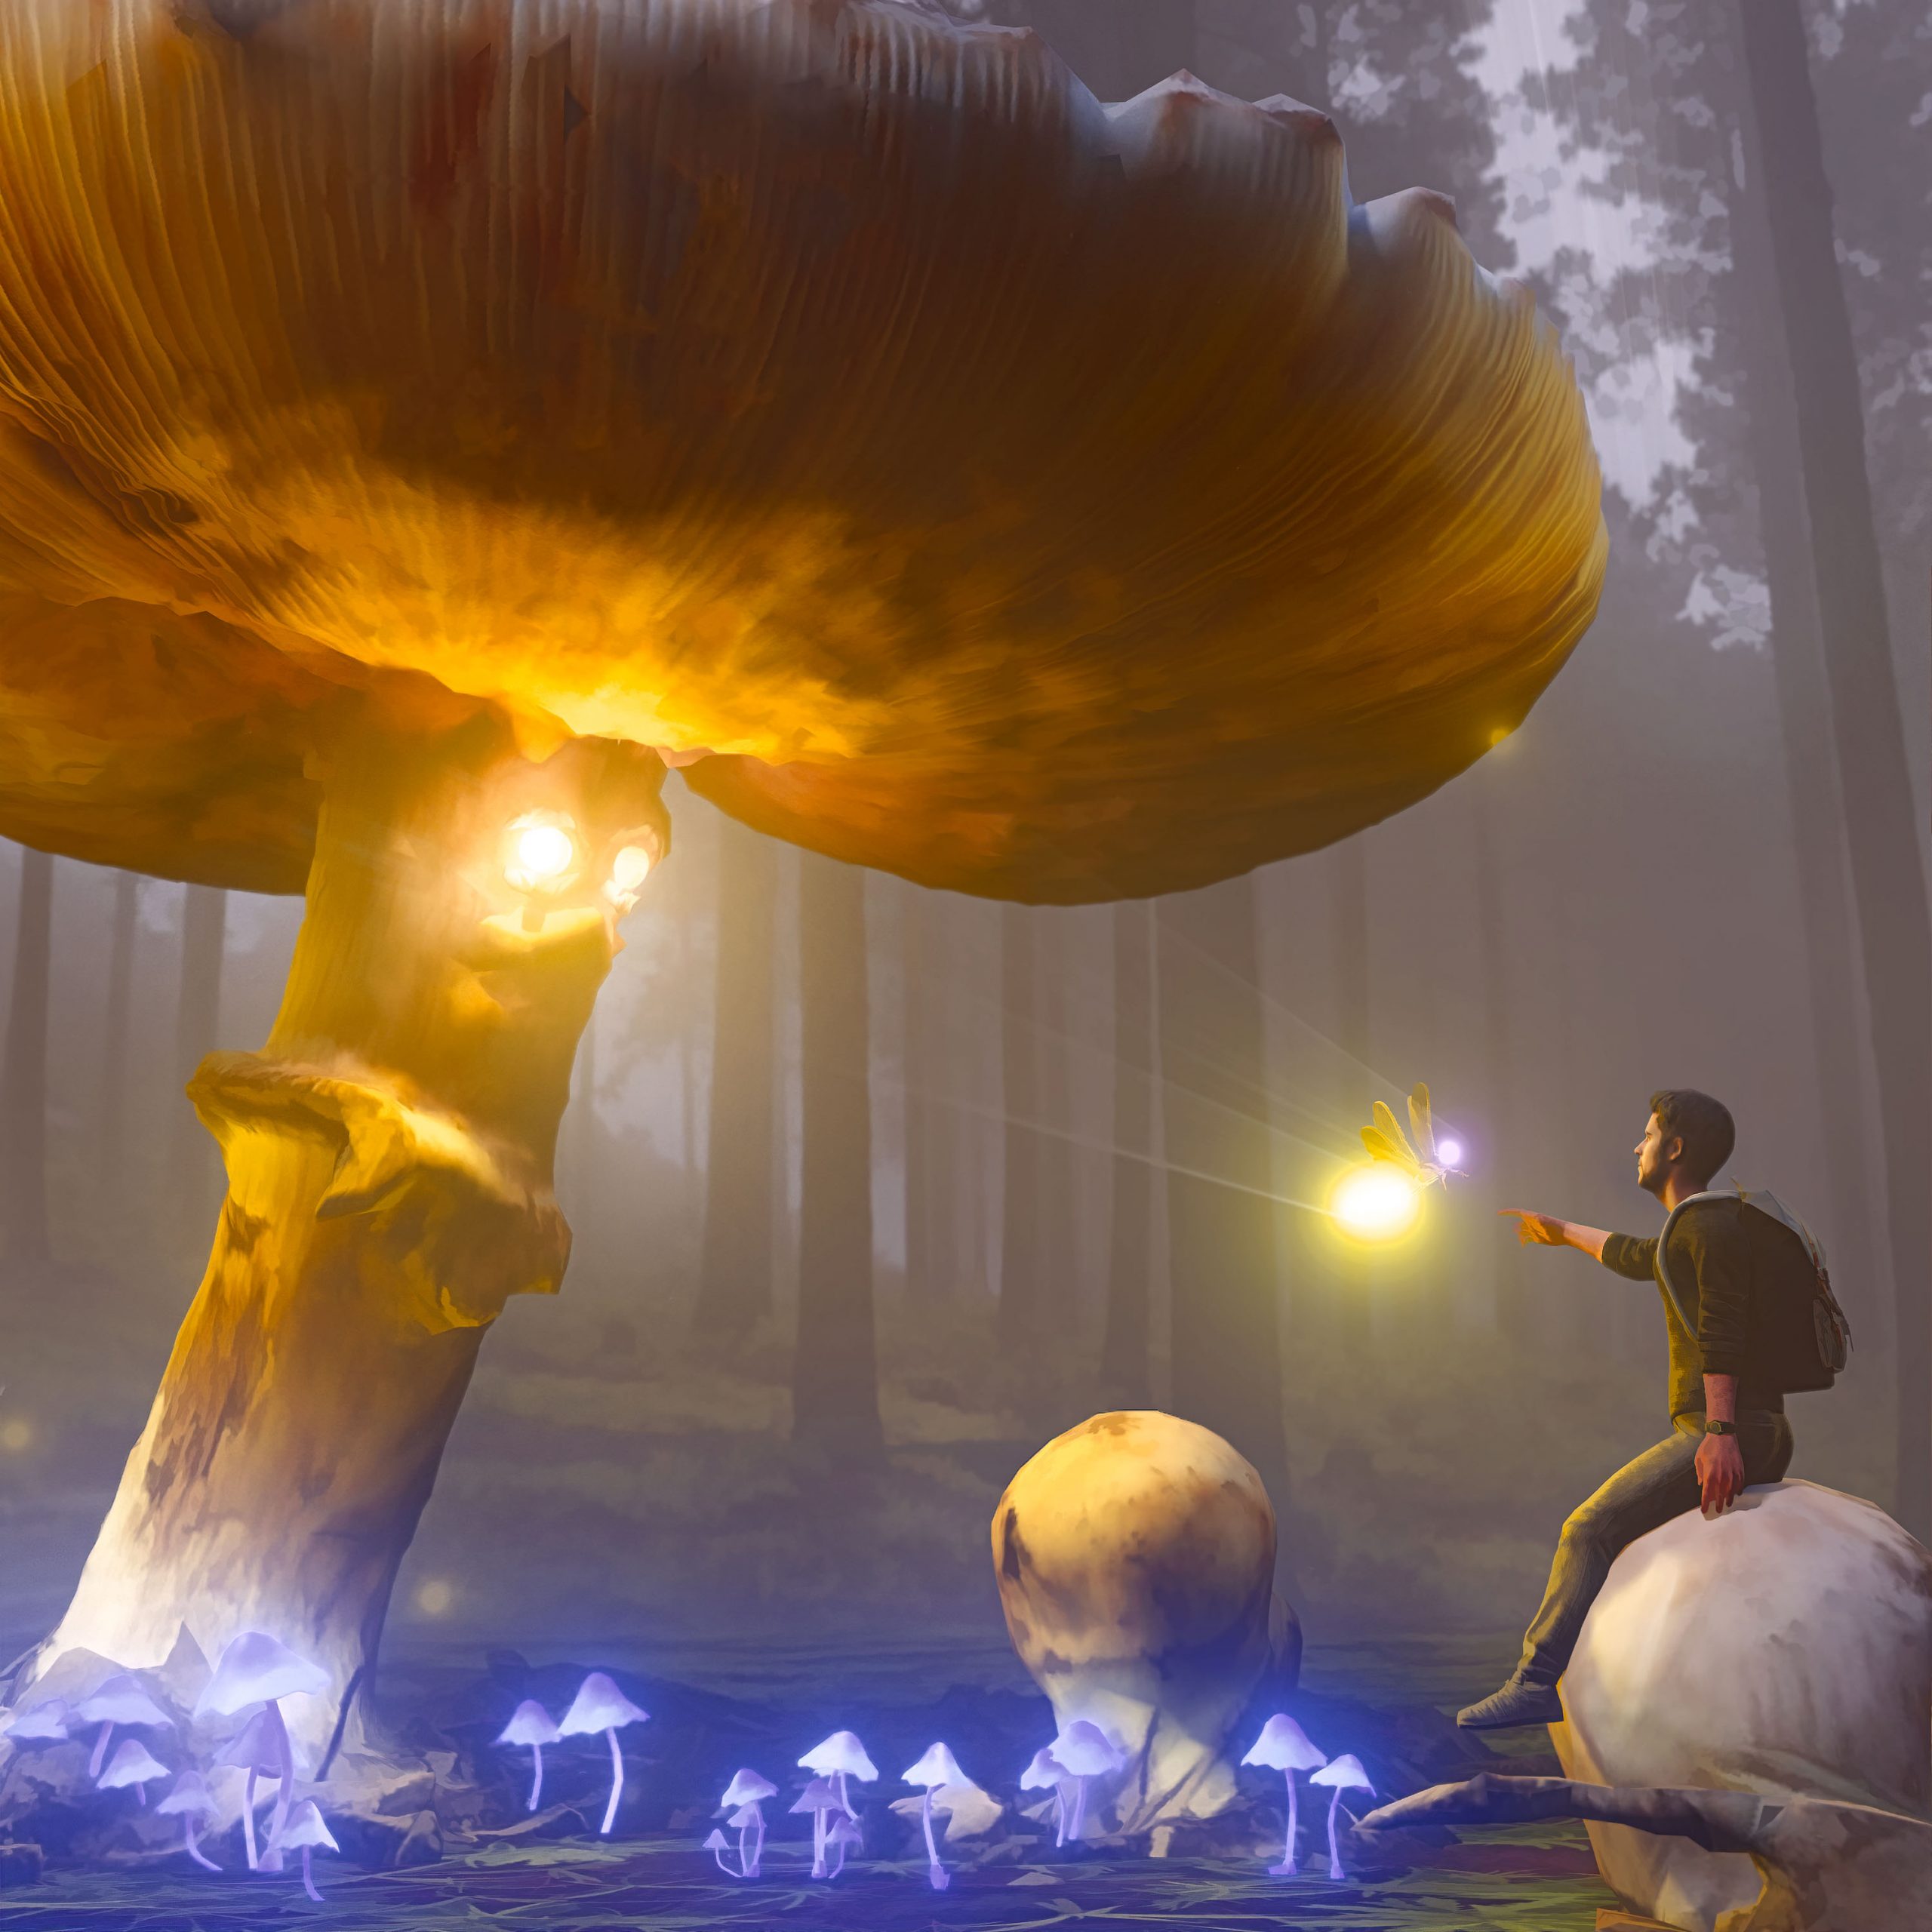 A magic Mushroom Forest, with a huge mushroom in the middle, covered with smaller blue mushrooms emitting light, a man sitting and reaching out towards a big firefly. - 3D animations & artworks Created by Henrik Veres , Avian Brothers #henrikveres #avianbrothers